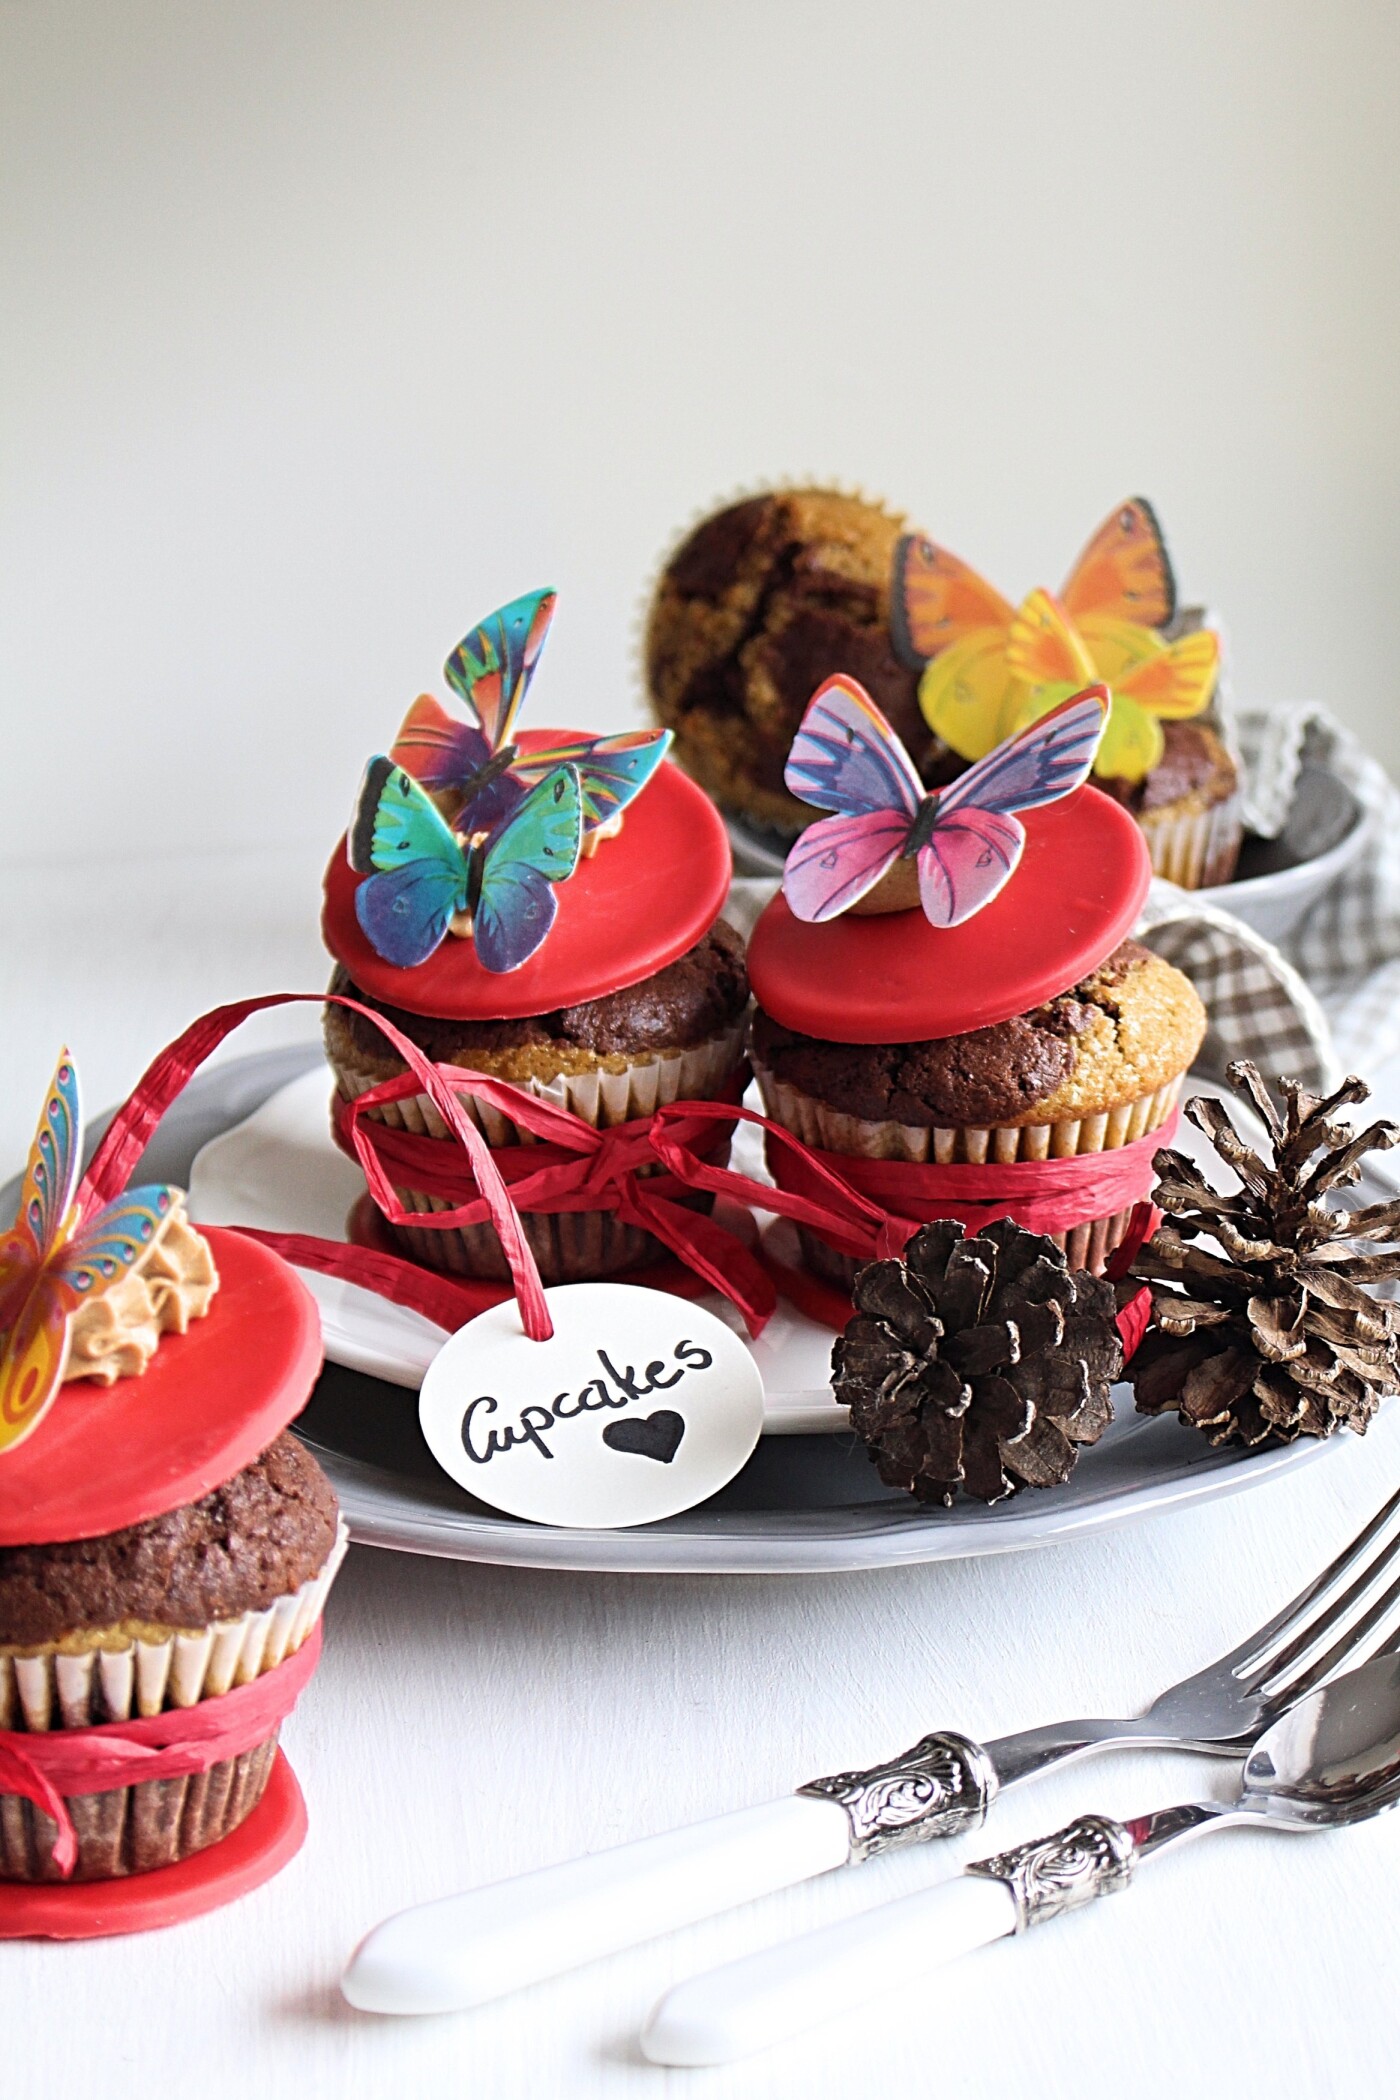 Coffee and chocolate together? Best combination for breakfast or coffeetime! Topped with chocolatecream, red fondant and edible butterflies!